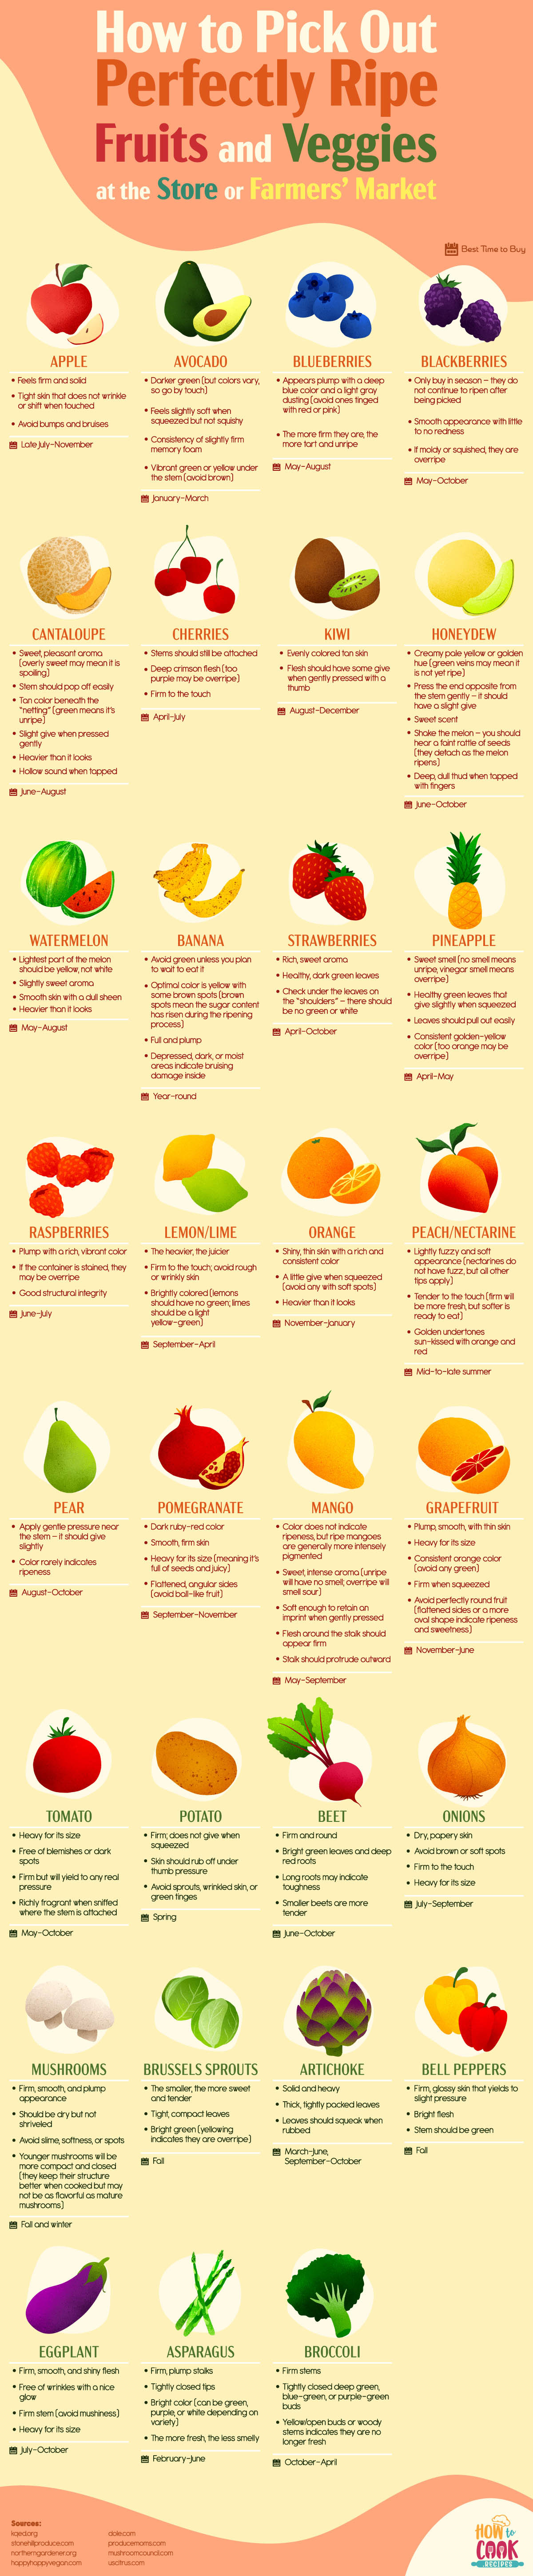 How to Pick Out Perfectly Ripe Fruits and Veggies